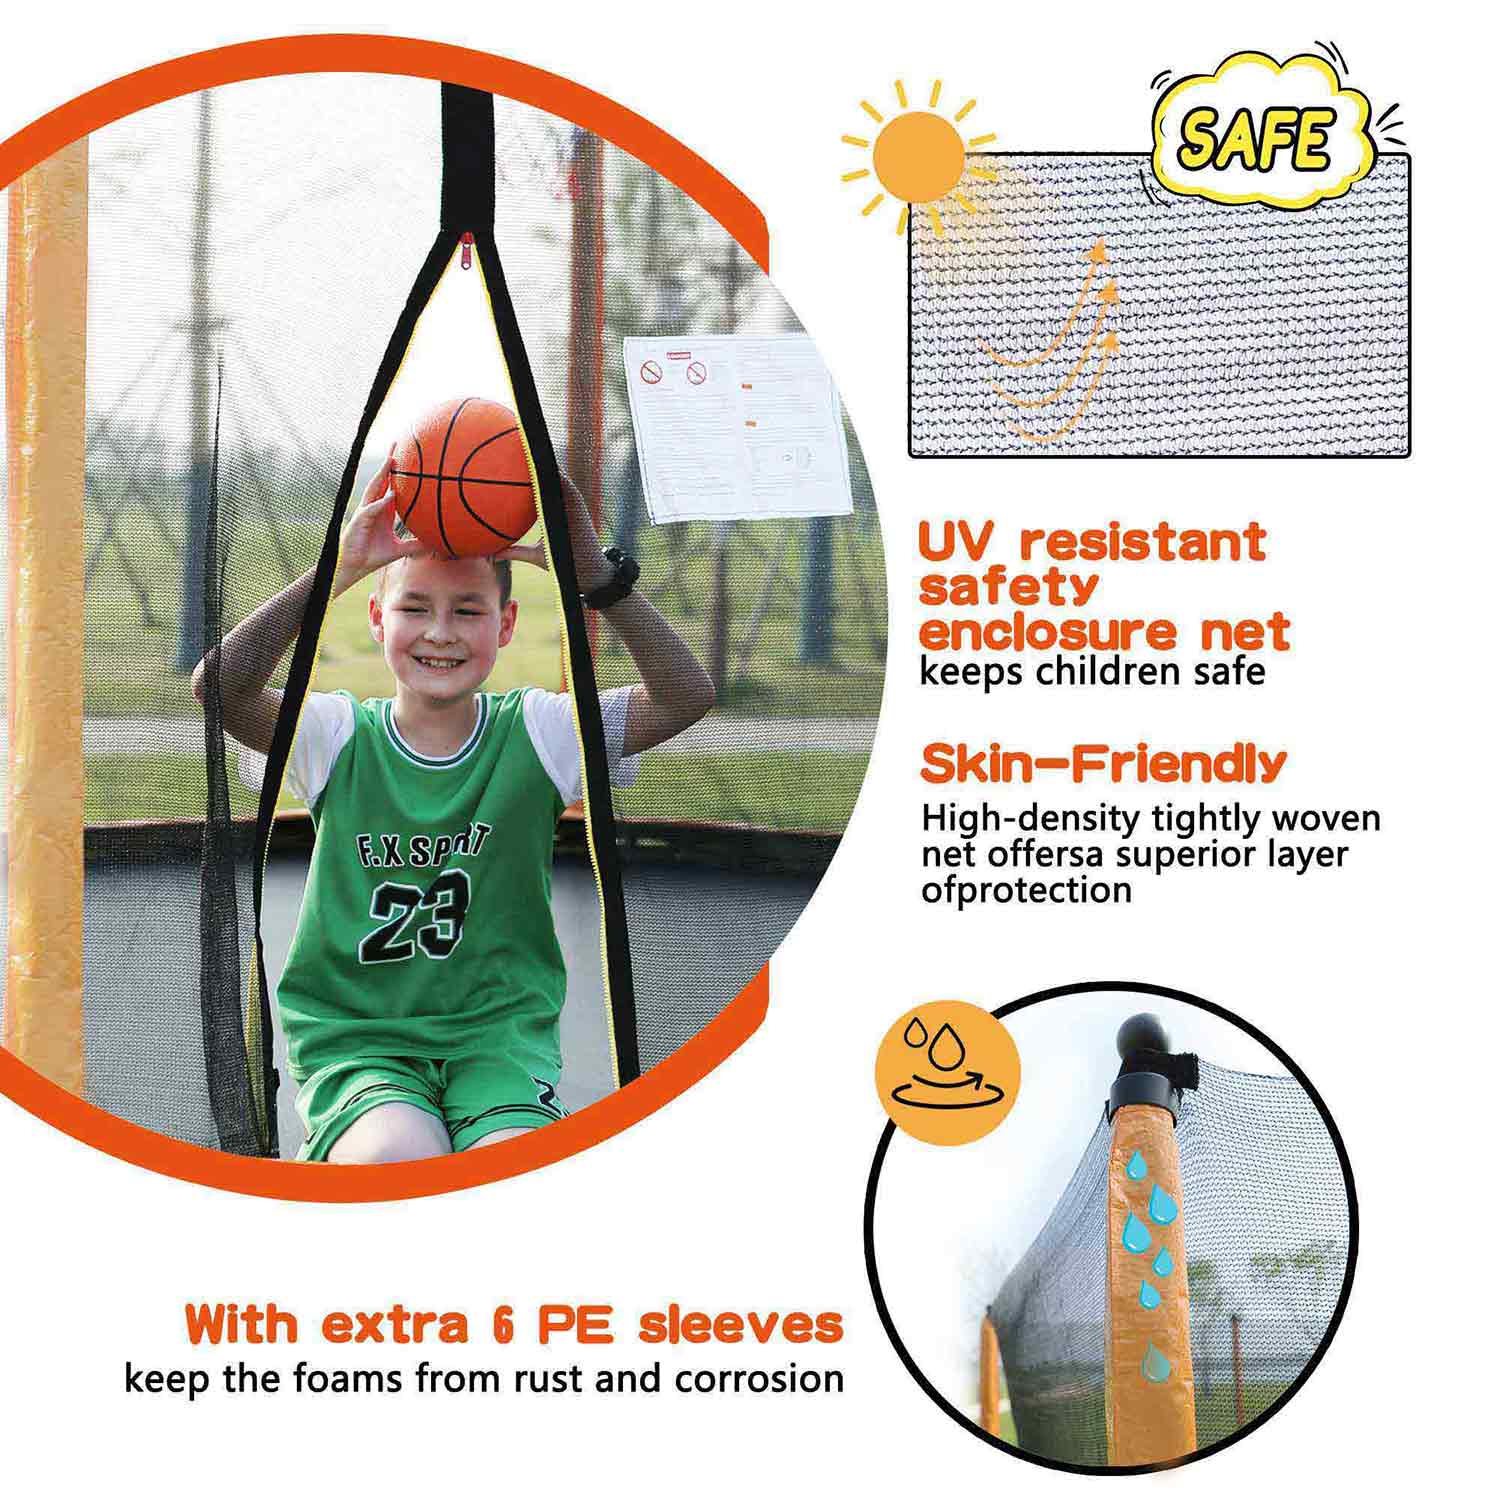 The boy is sitting on the trampoline and holding a basketball with the text next to it saying: UV resistant safety enclosure net keeps children safe, skin-friendly, with extra 6 pe sleeves